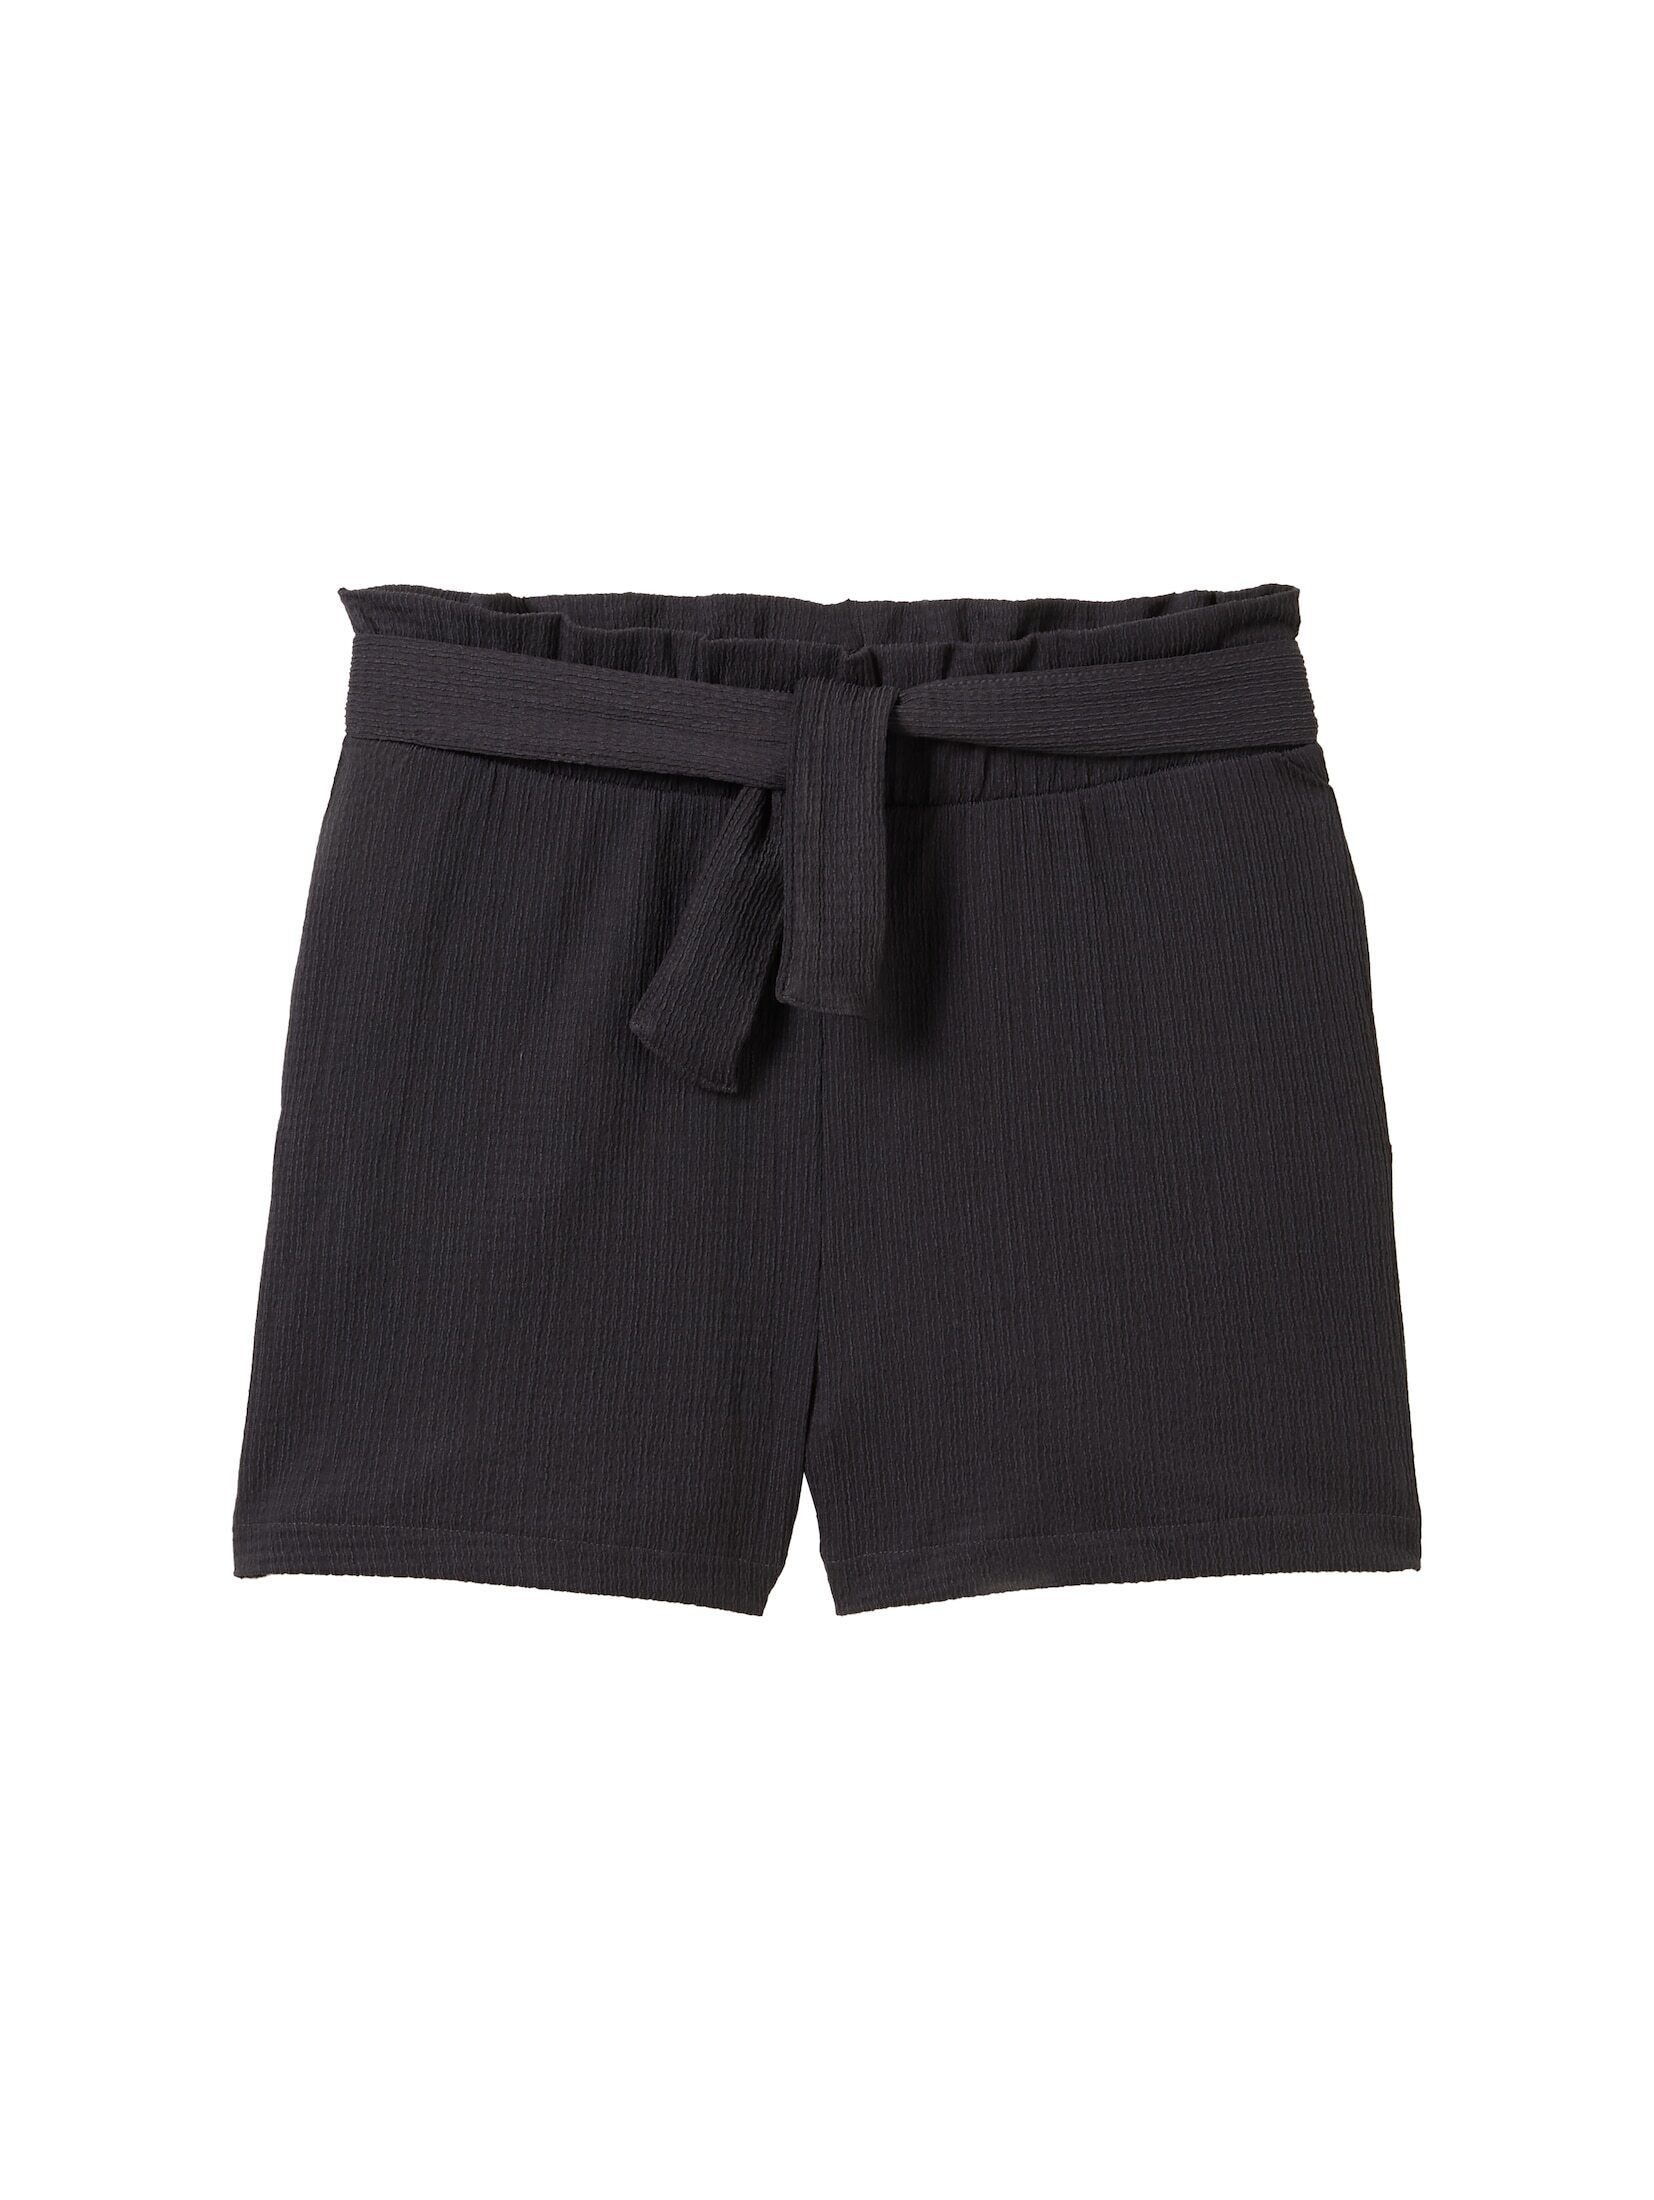 TOM TAILOR Chinoshorts Relaxed Shorts mit Raffung